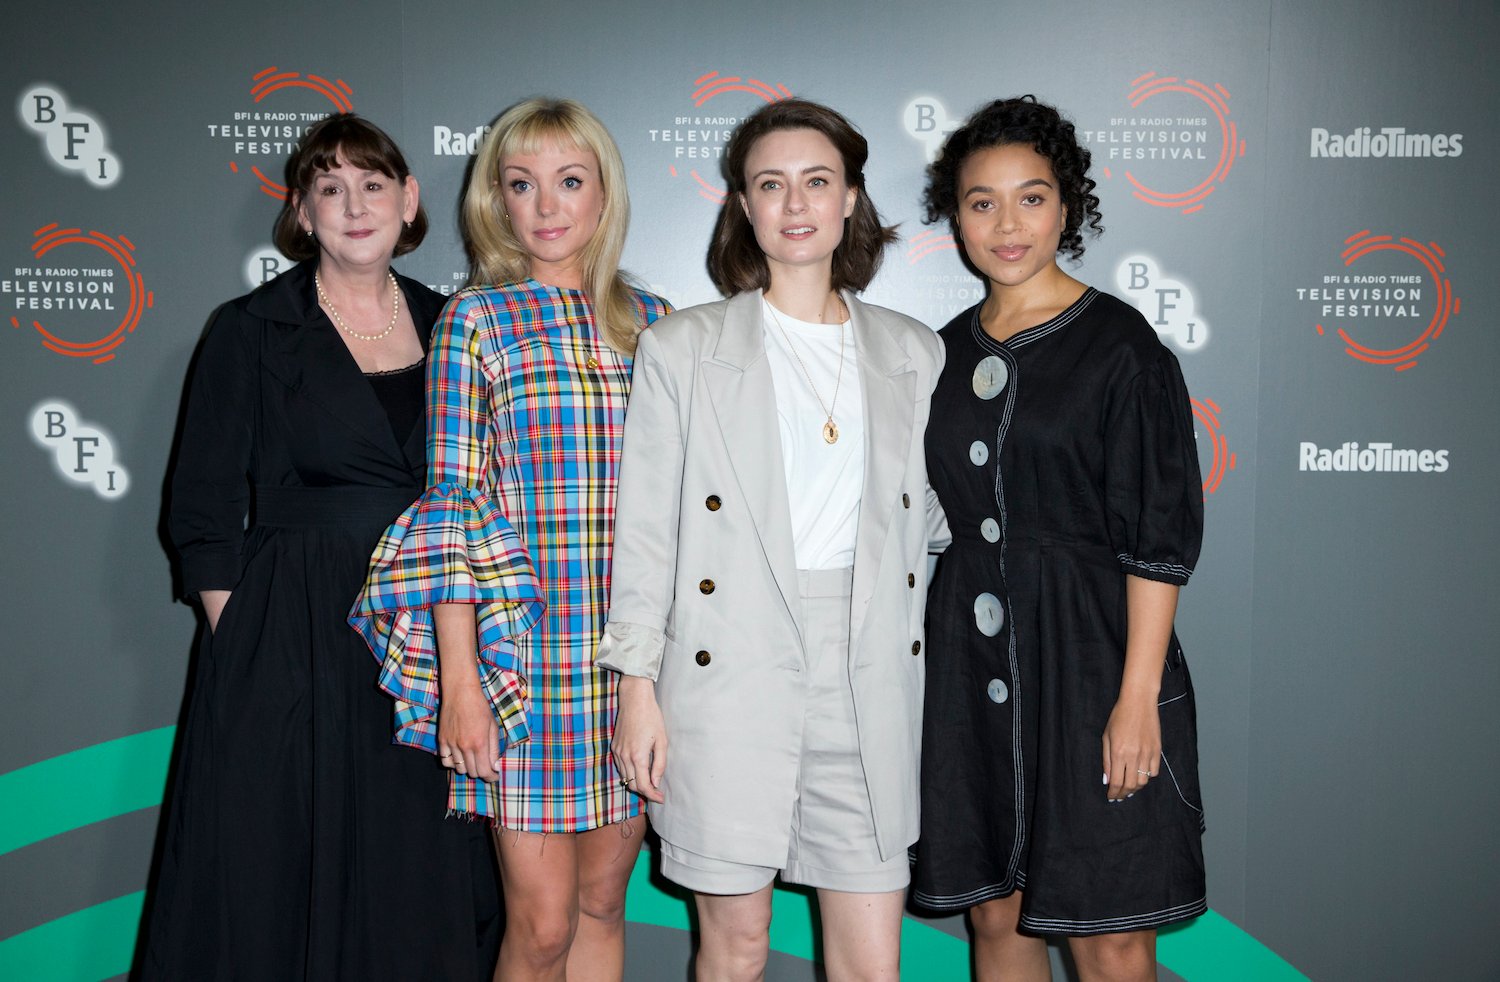 Heidi Thomas, Helen George, Jennifer Kirby, and Leonie Elliott from the 'Call the Midwife' Season 12 cast standing together at an event